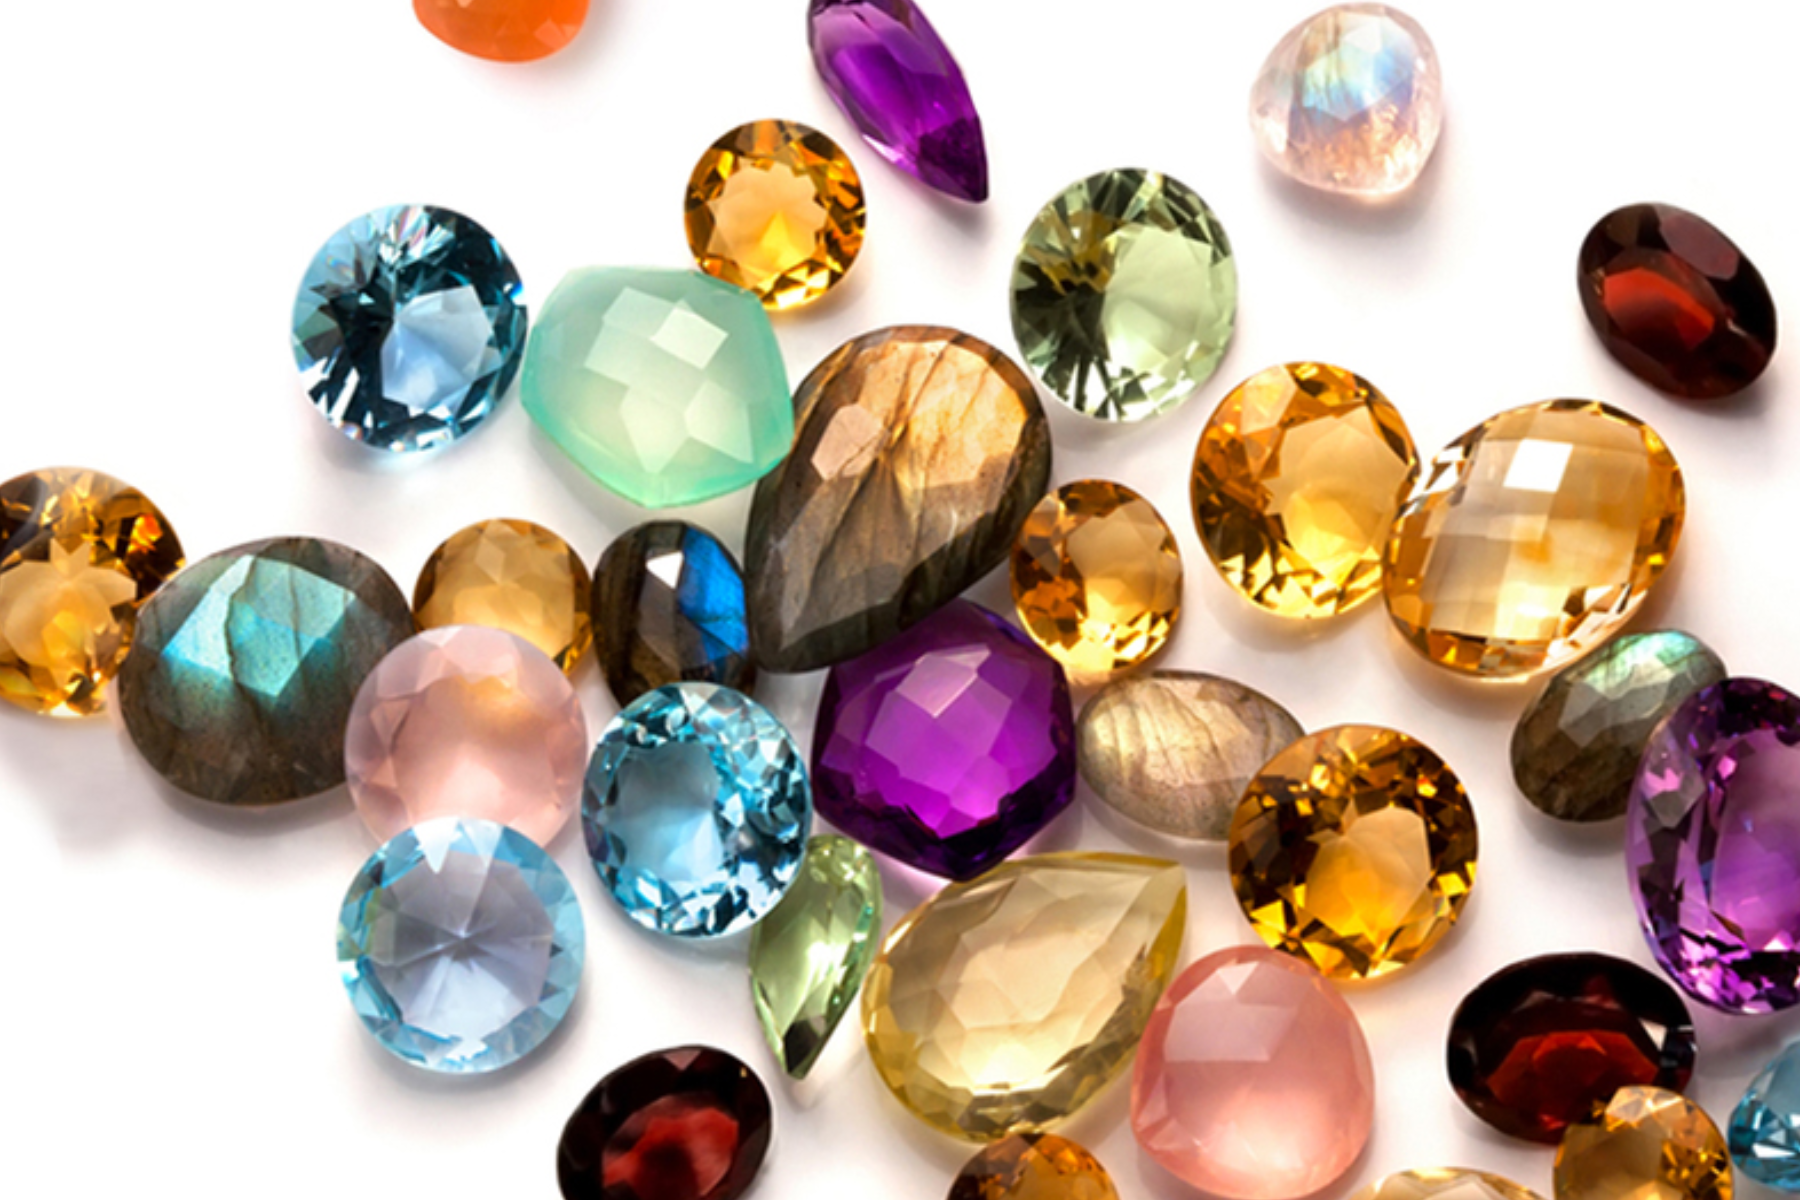 The image depicts a group of valuable gemstones